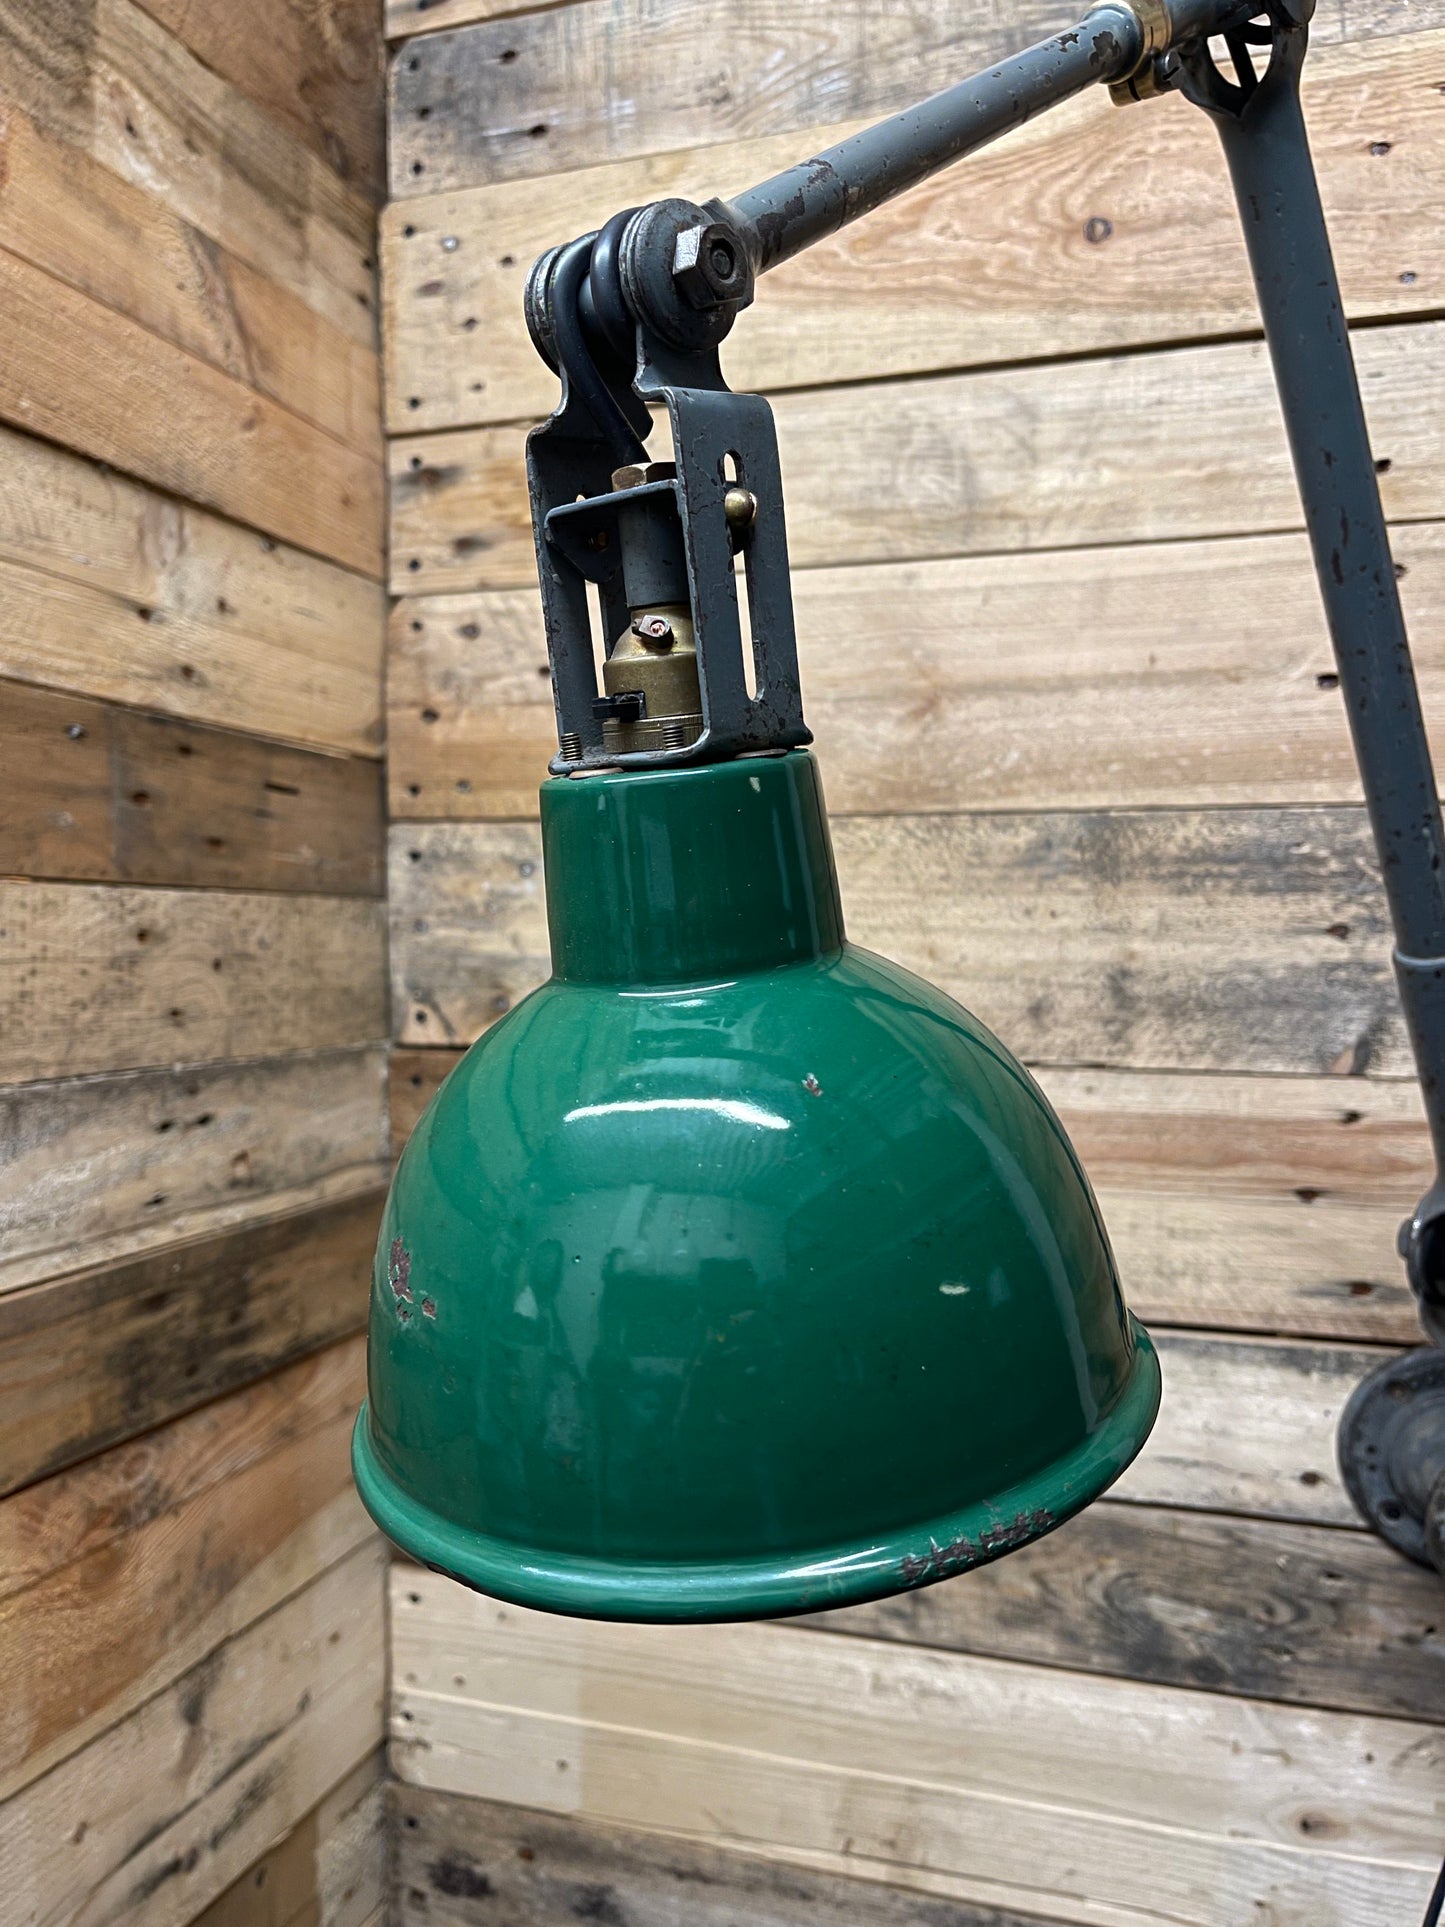 1930s Industrial Wall Lamp By John Dugdill & Co